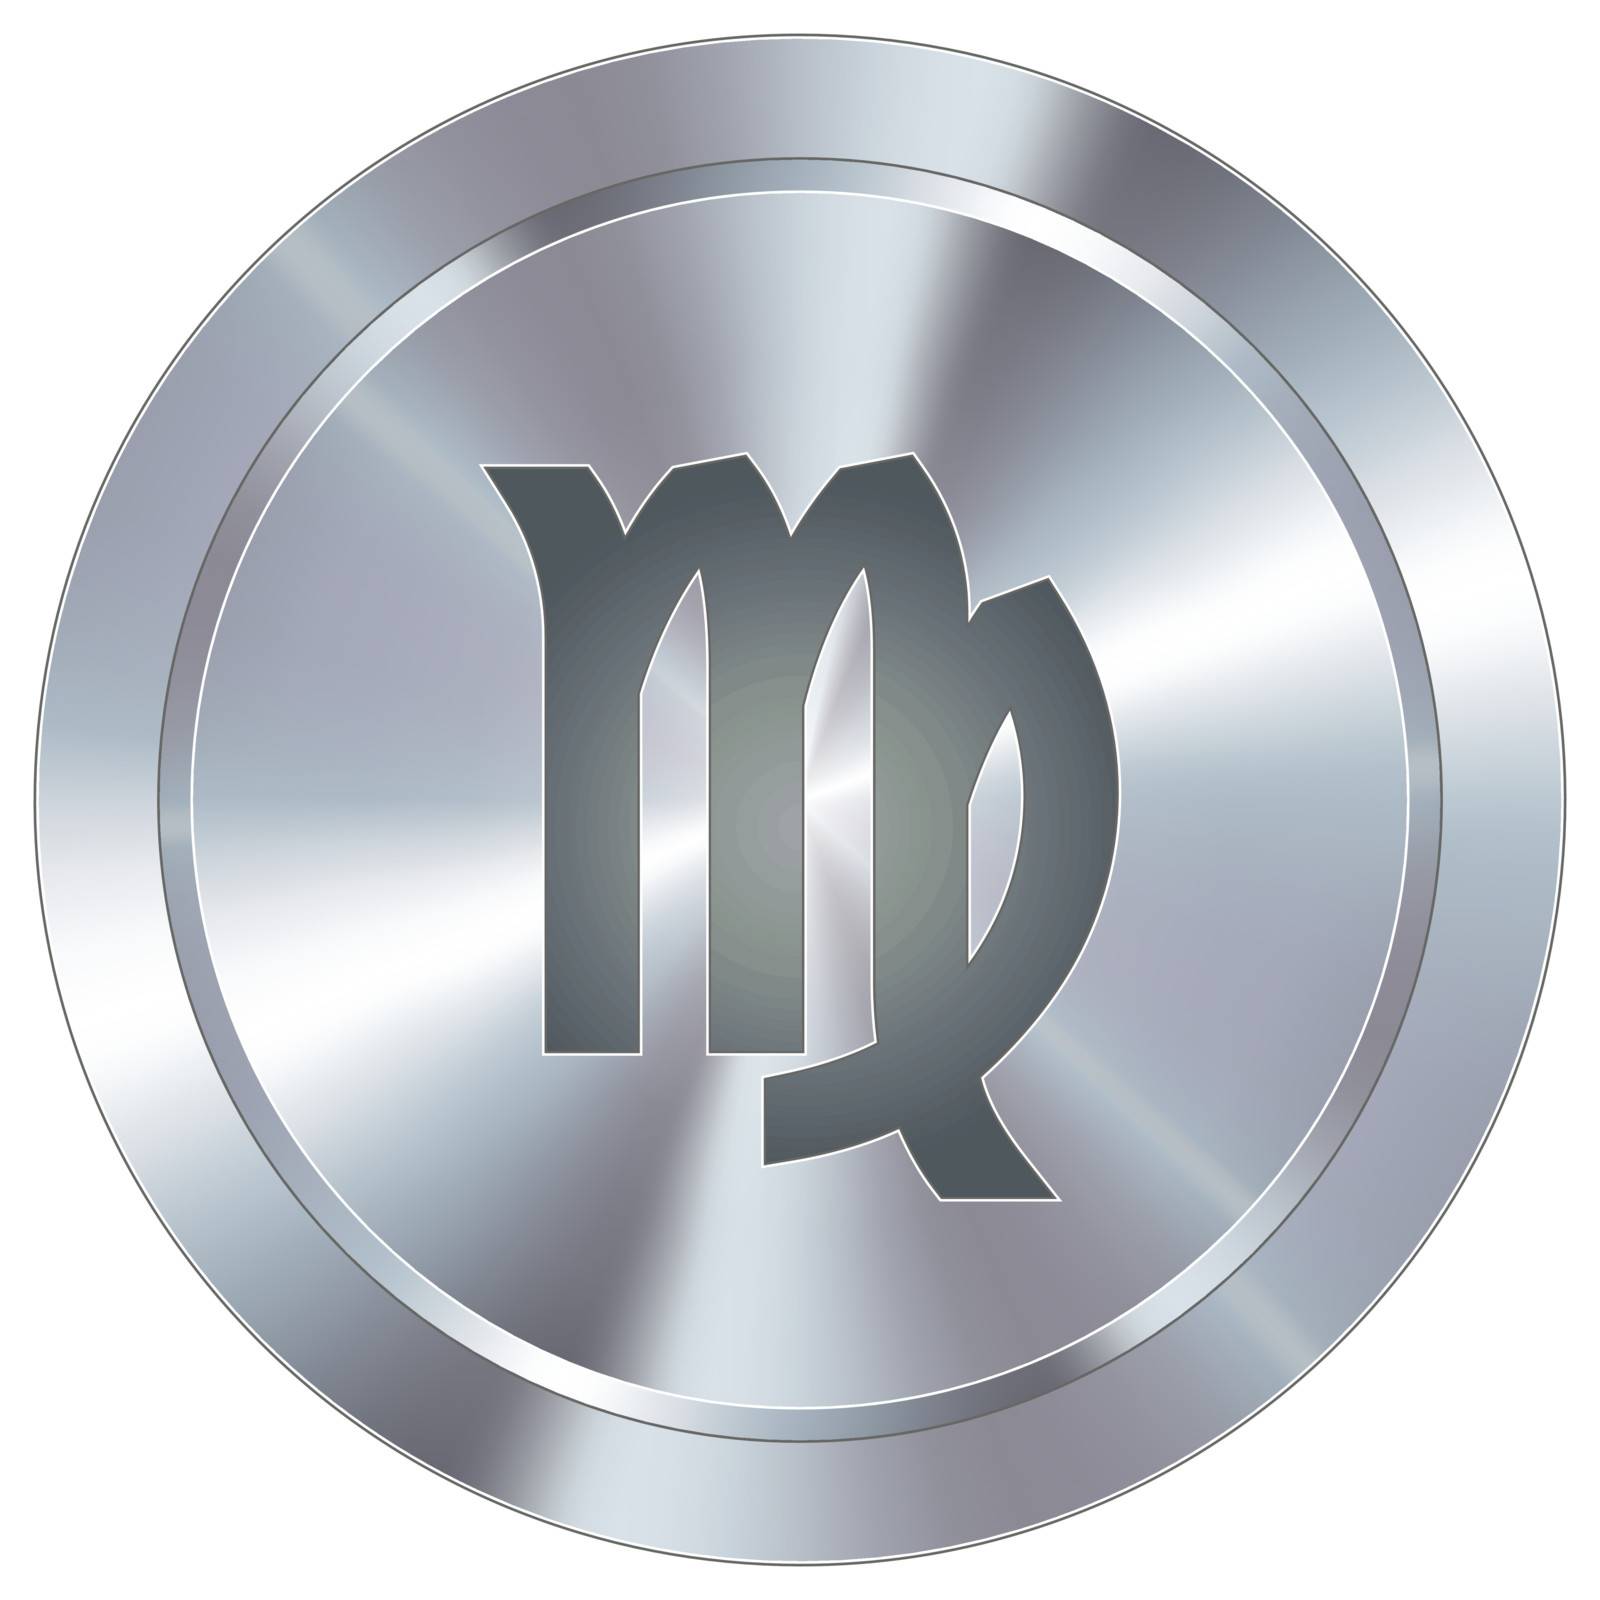 Virgo zodiac industrial button by lhfgraphics